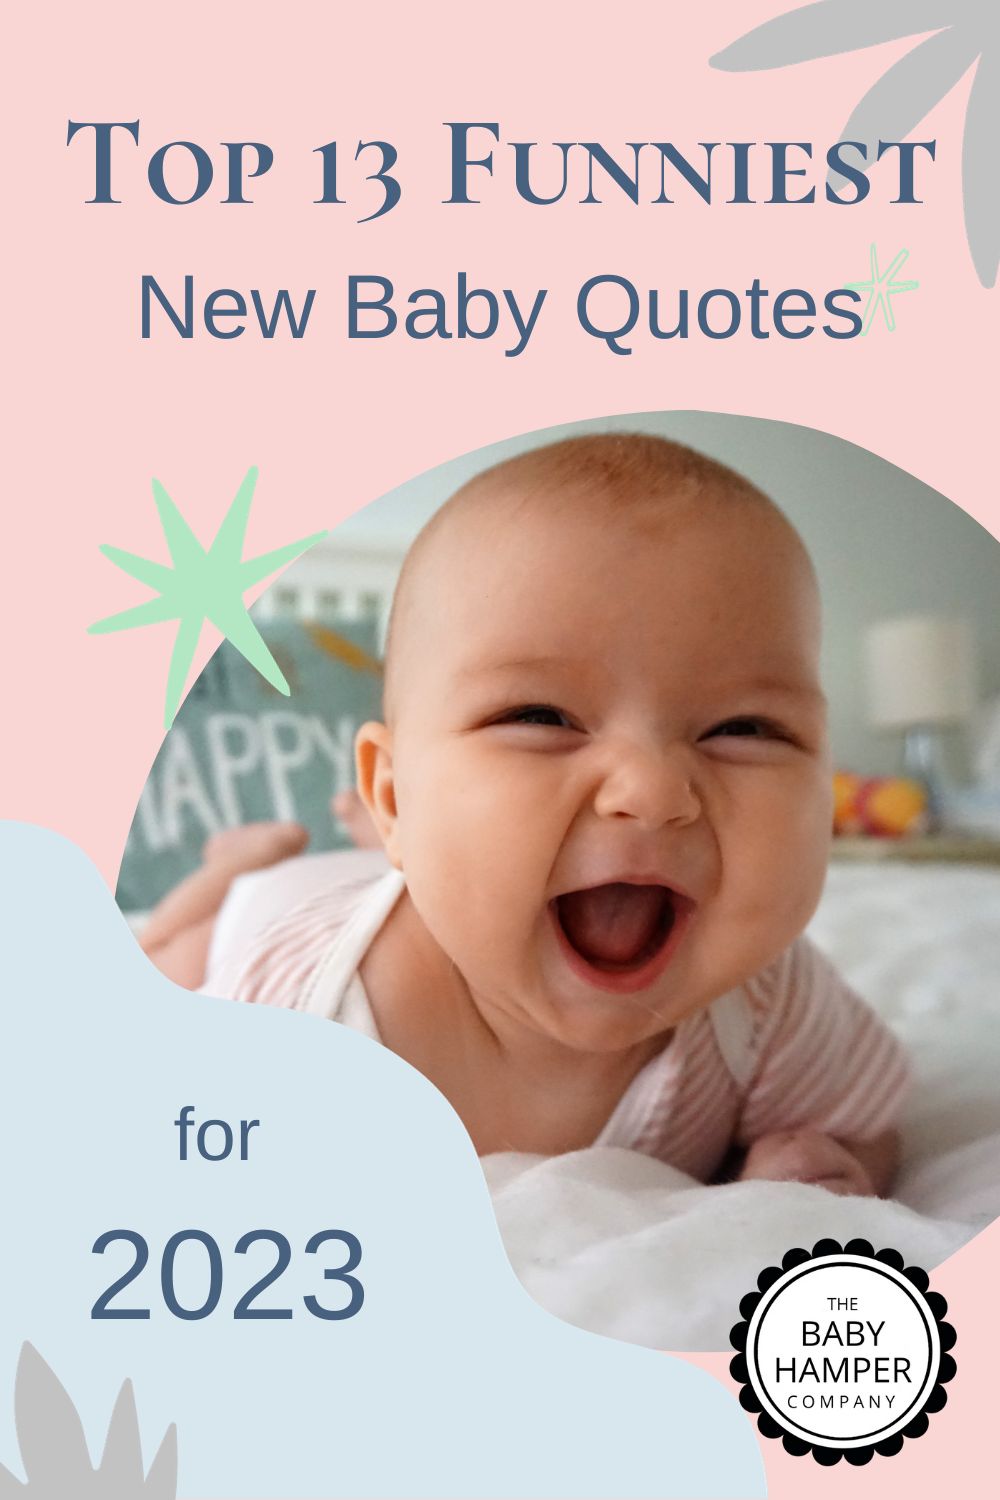 Top 13 Funniest New Baby Quotes for 2023